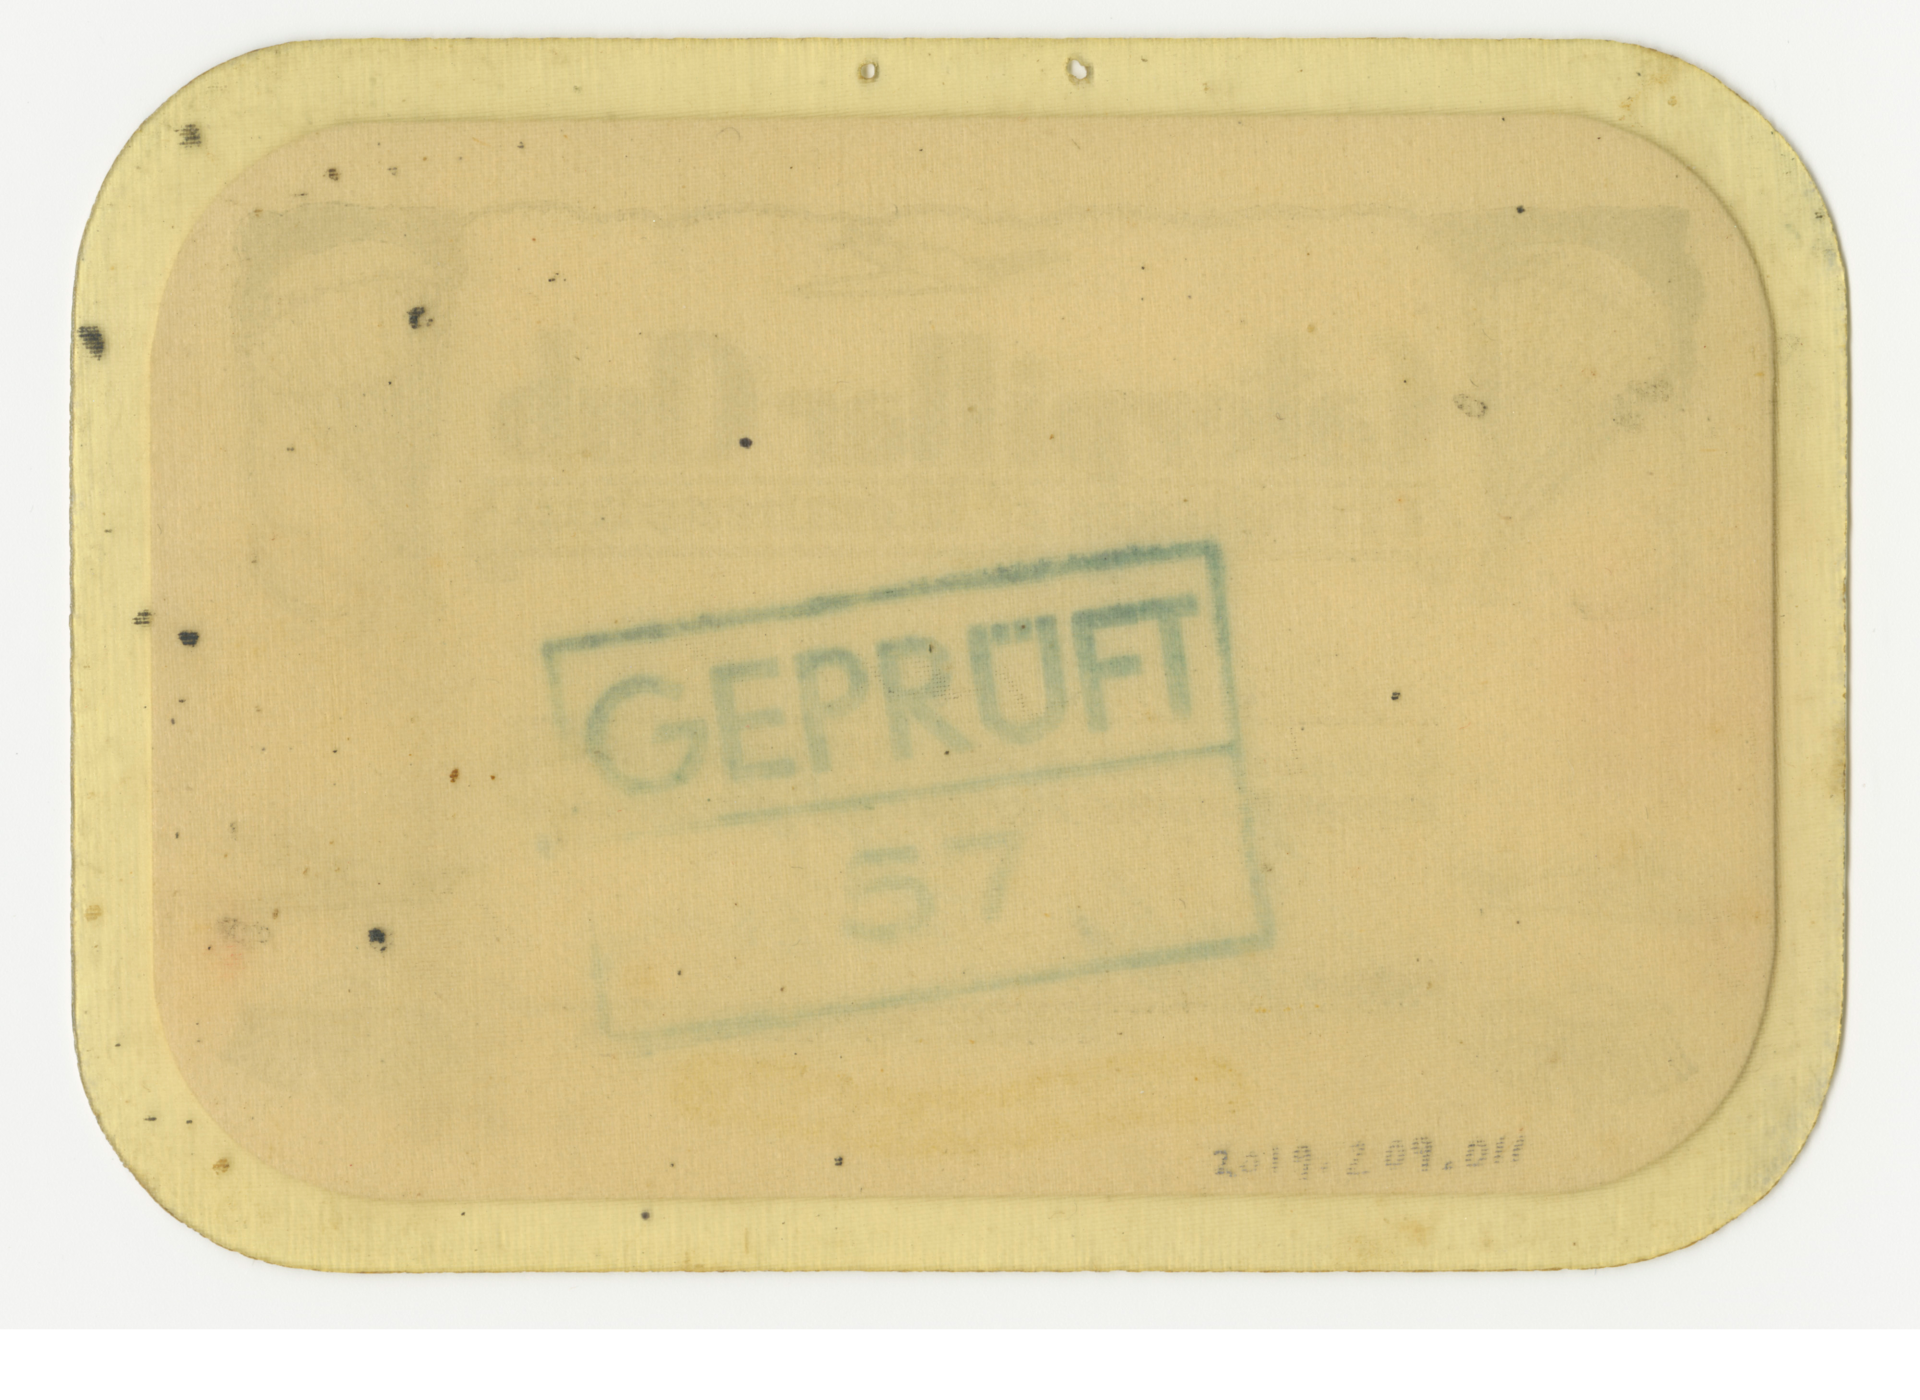 Bombardier Captain Harold Romm’s membership card with Stalag Luft III censor marks on the reverse